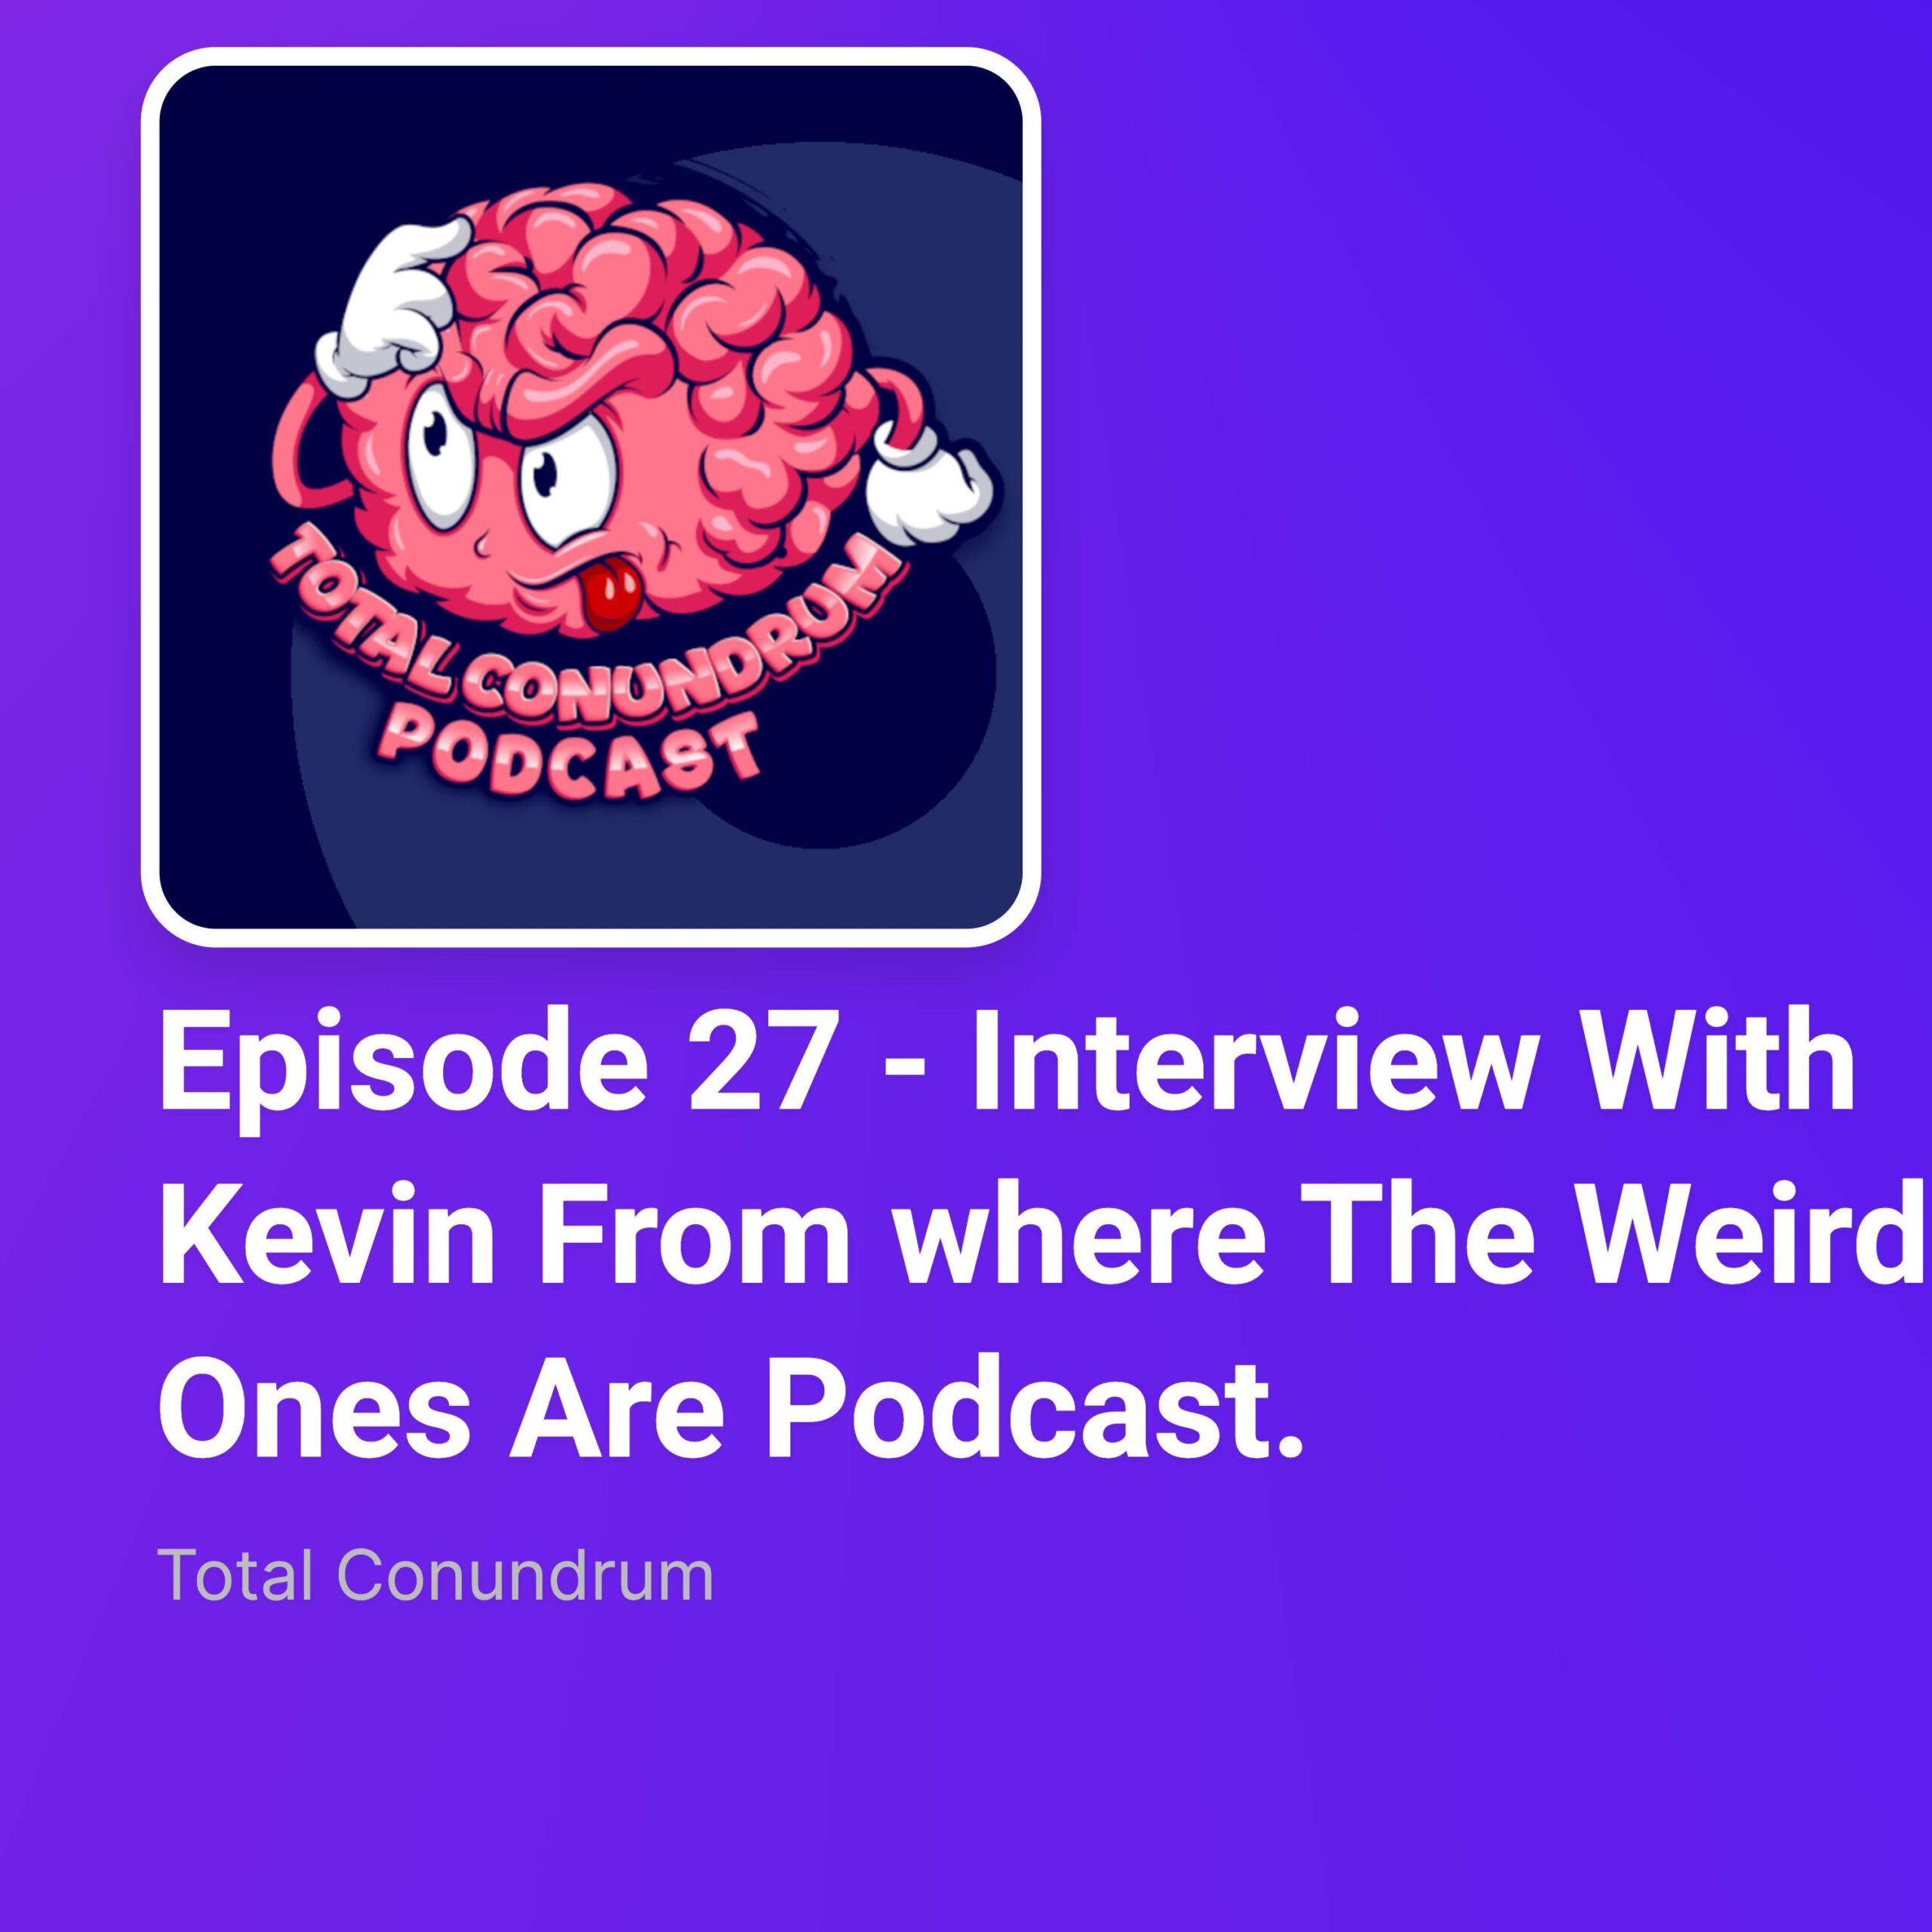 Episode 27 - Interview With Kevin From where The Weird Ones Are Podcast.